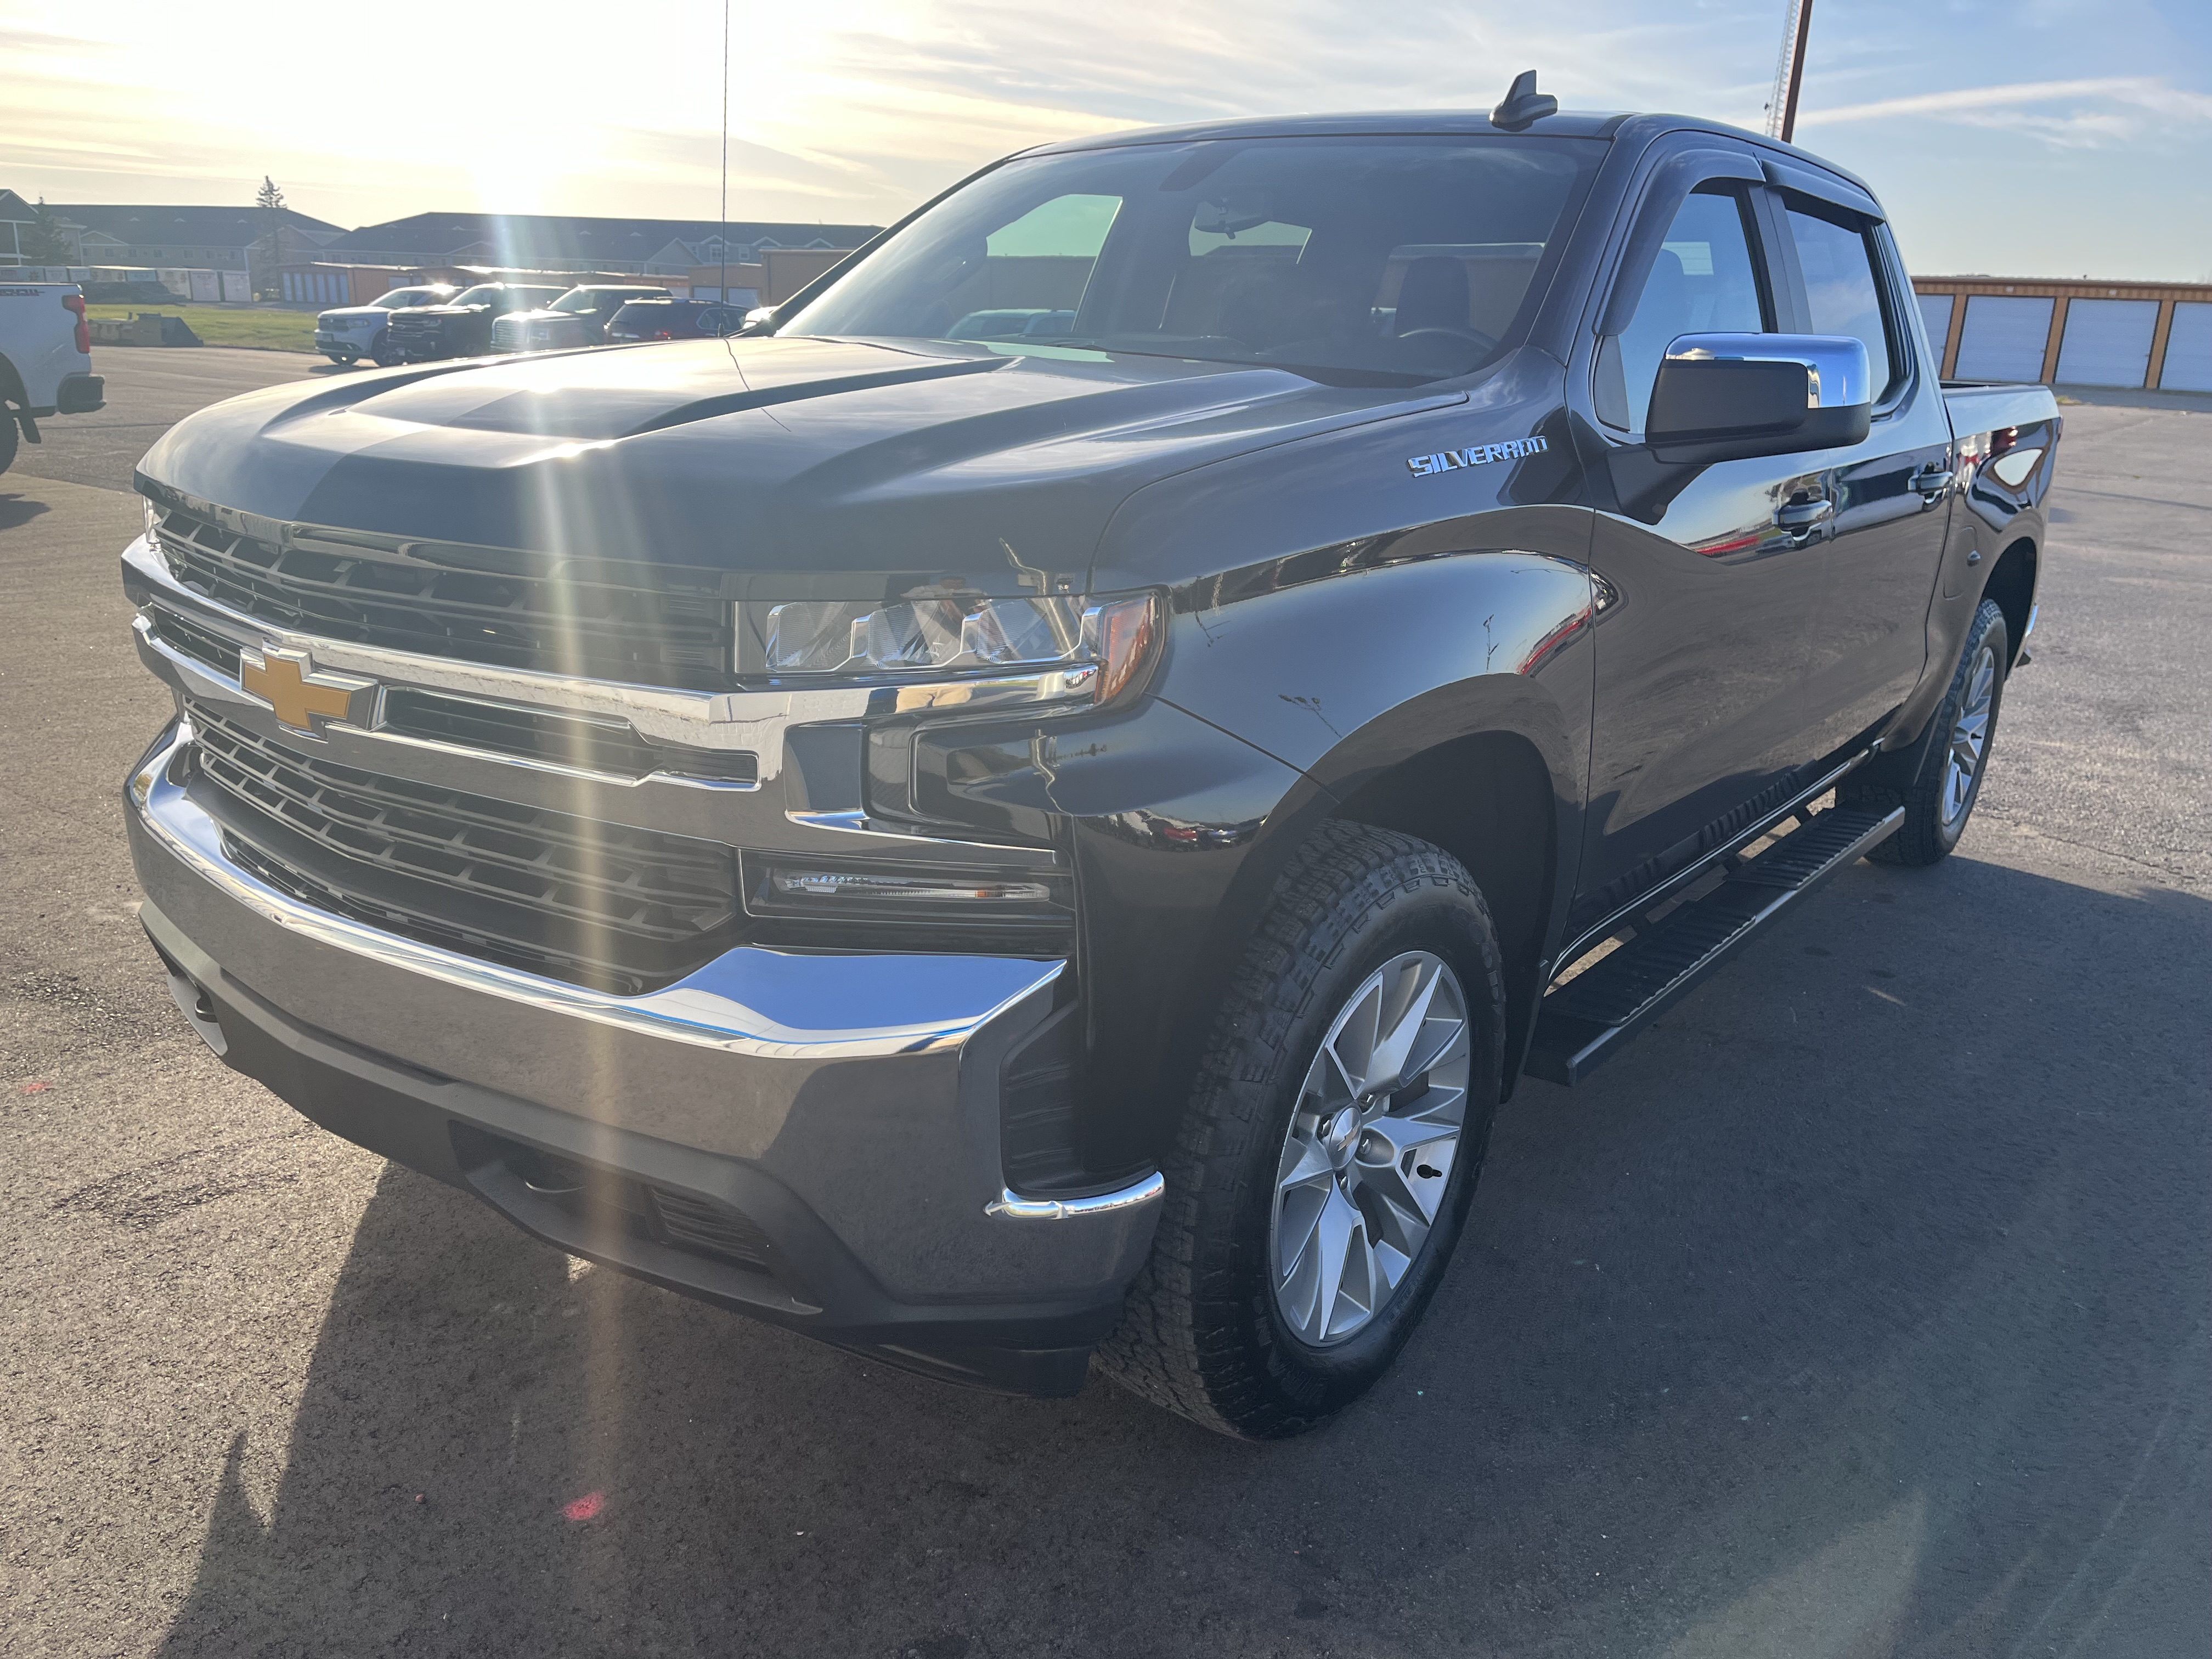 Used 2020 Chevrolet Silverado 1500 LT with VIN 3GCUYDED9LG243884 for sale in Thief River Falls, Minnesota